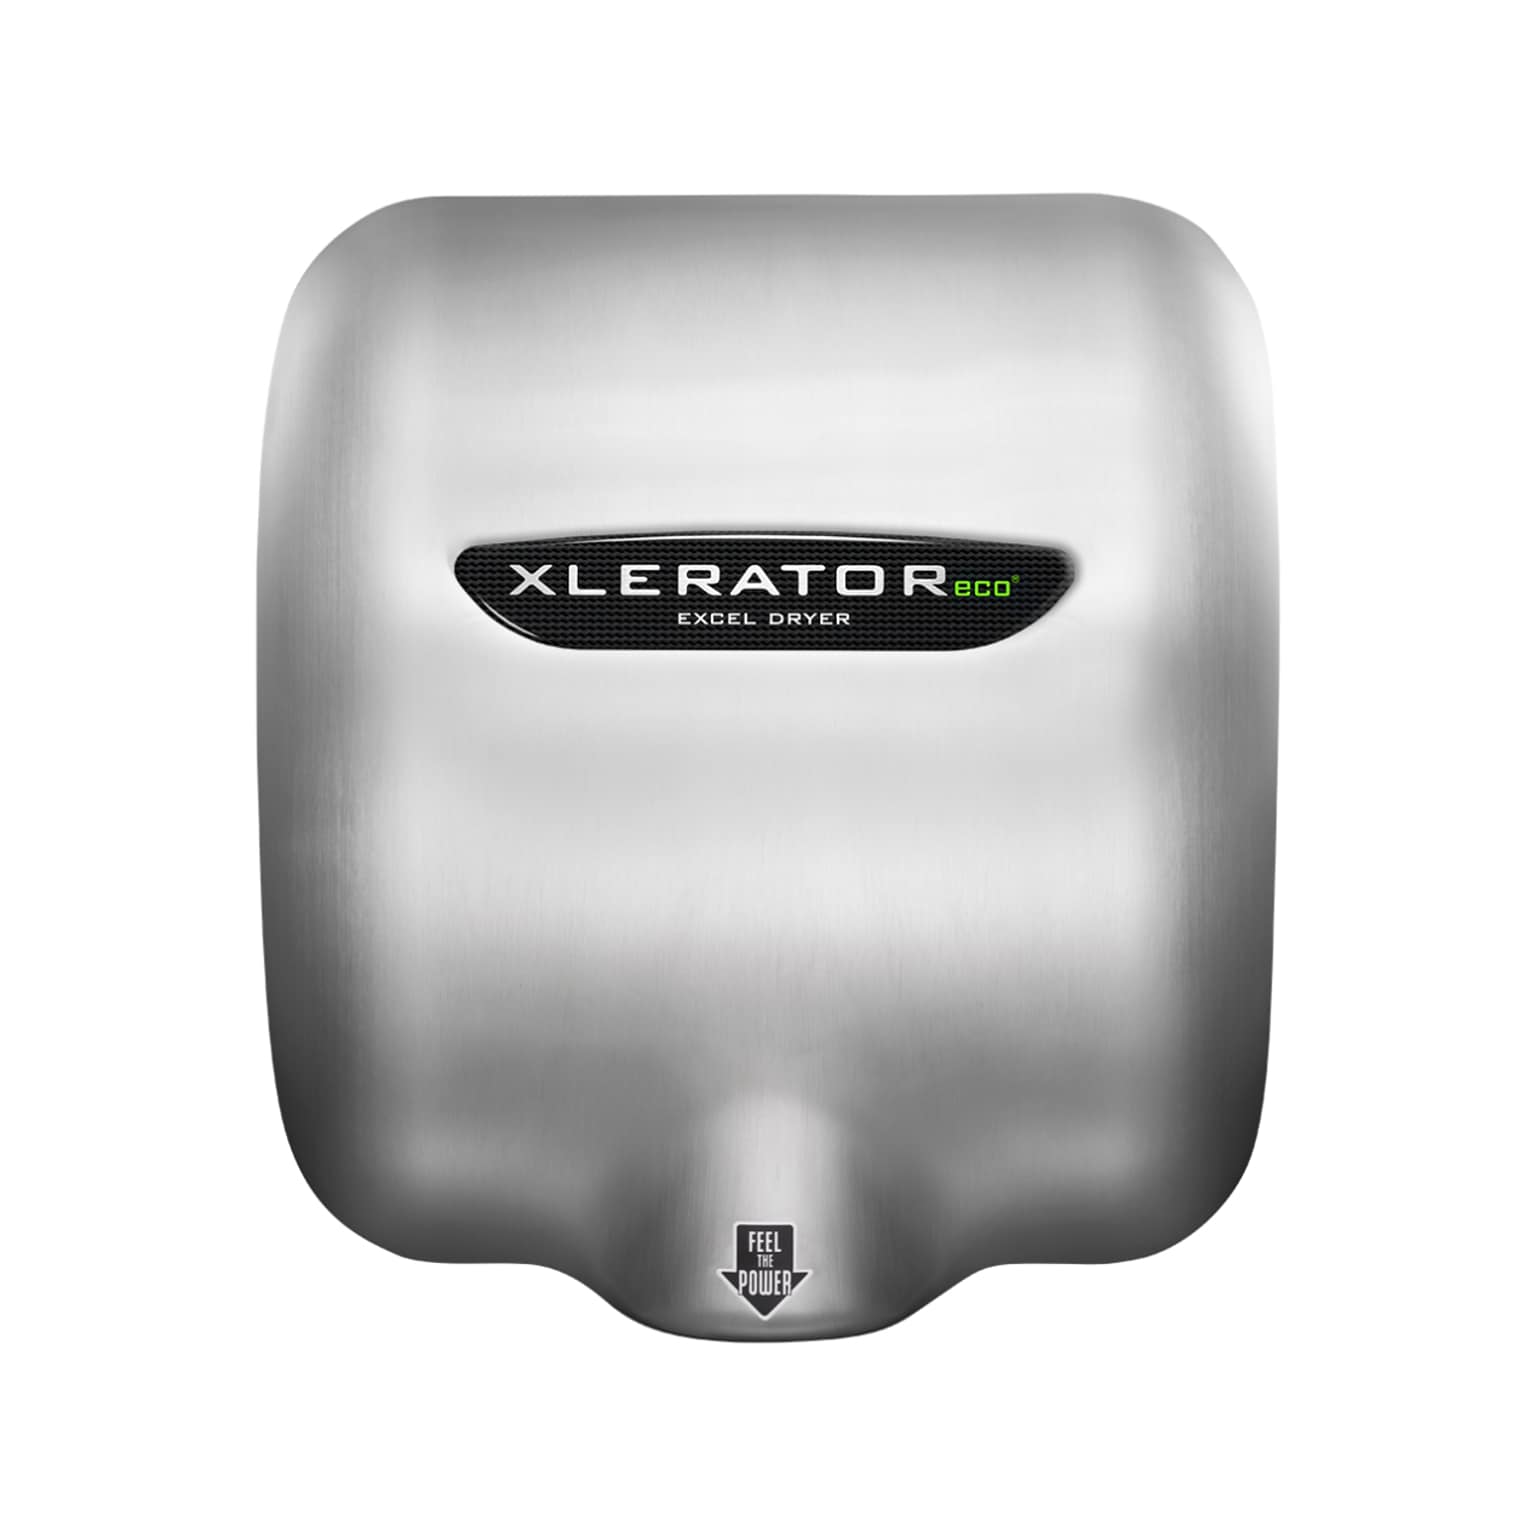 XLERATOReco 110-120V Automatic Hand Dryer, Brushed Stainless Steel (704161)